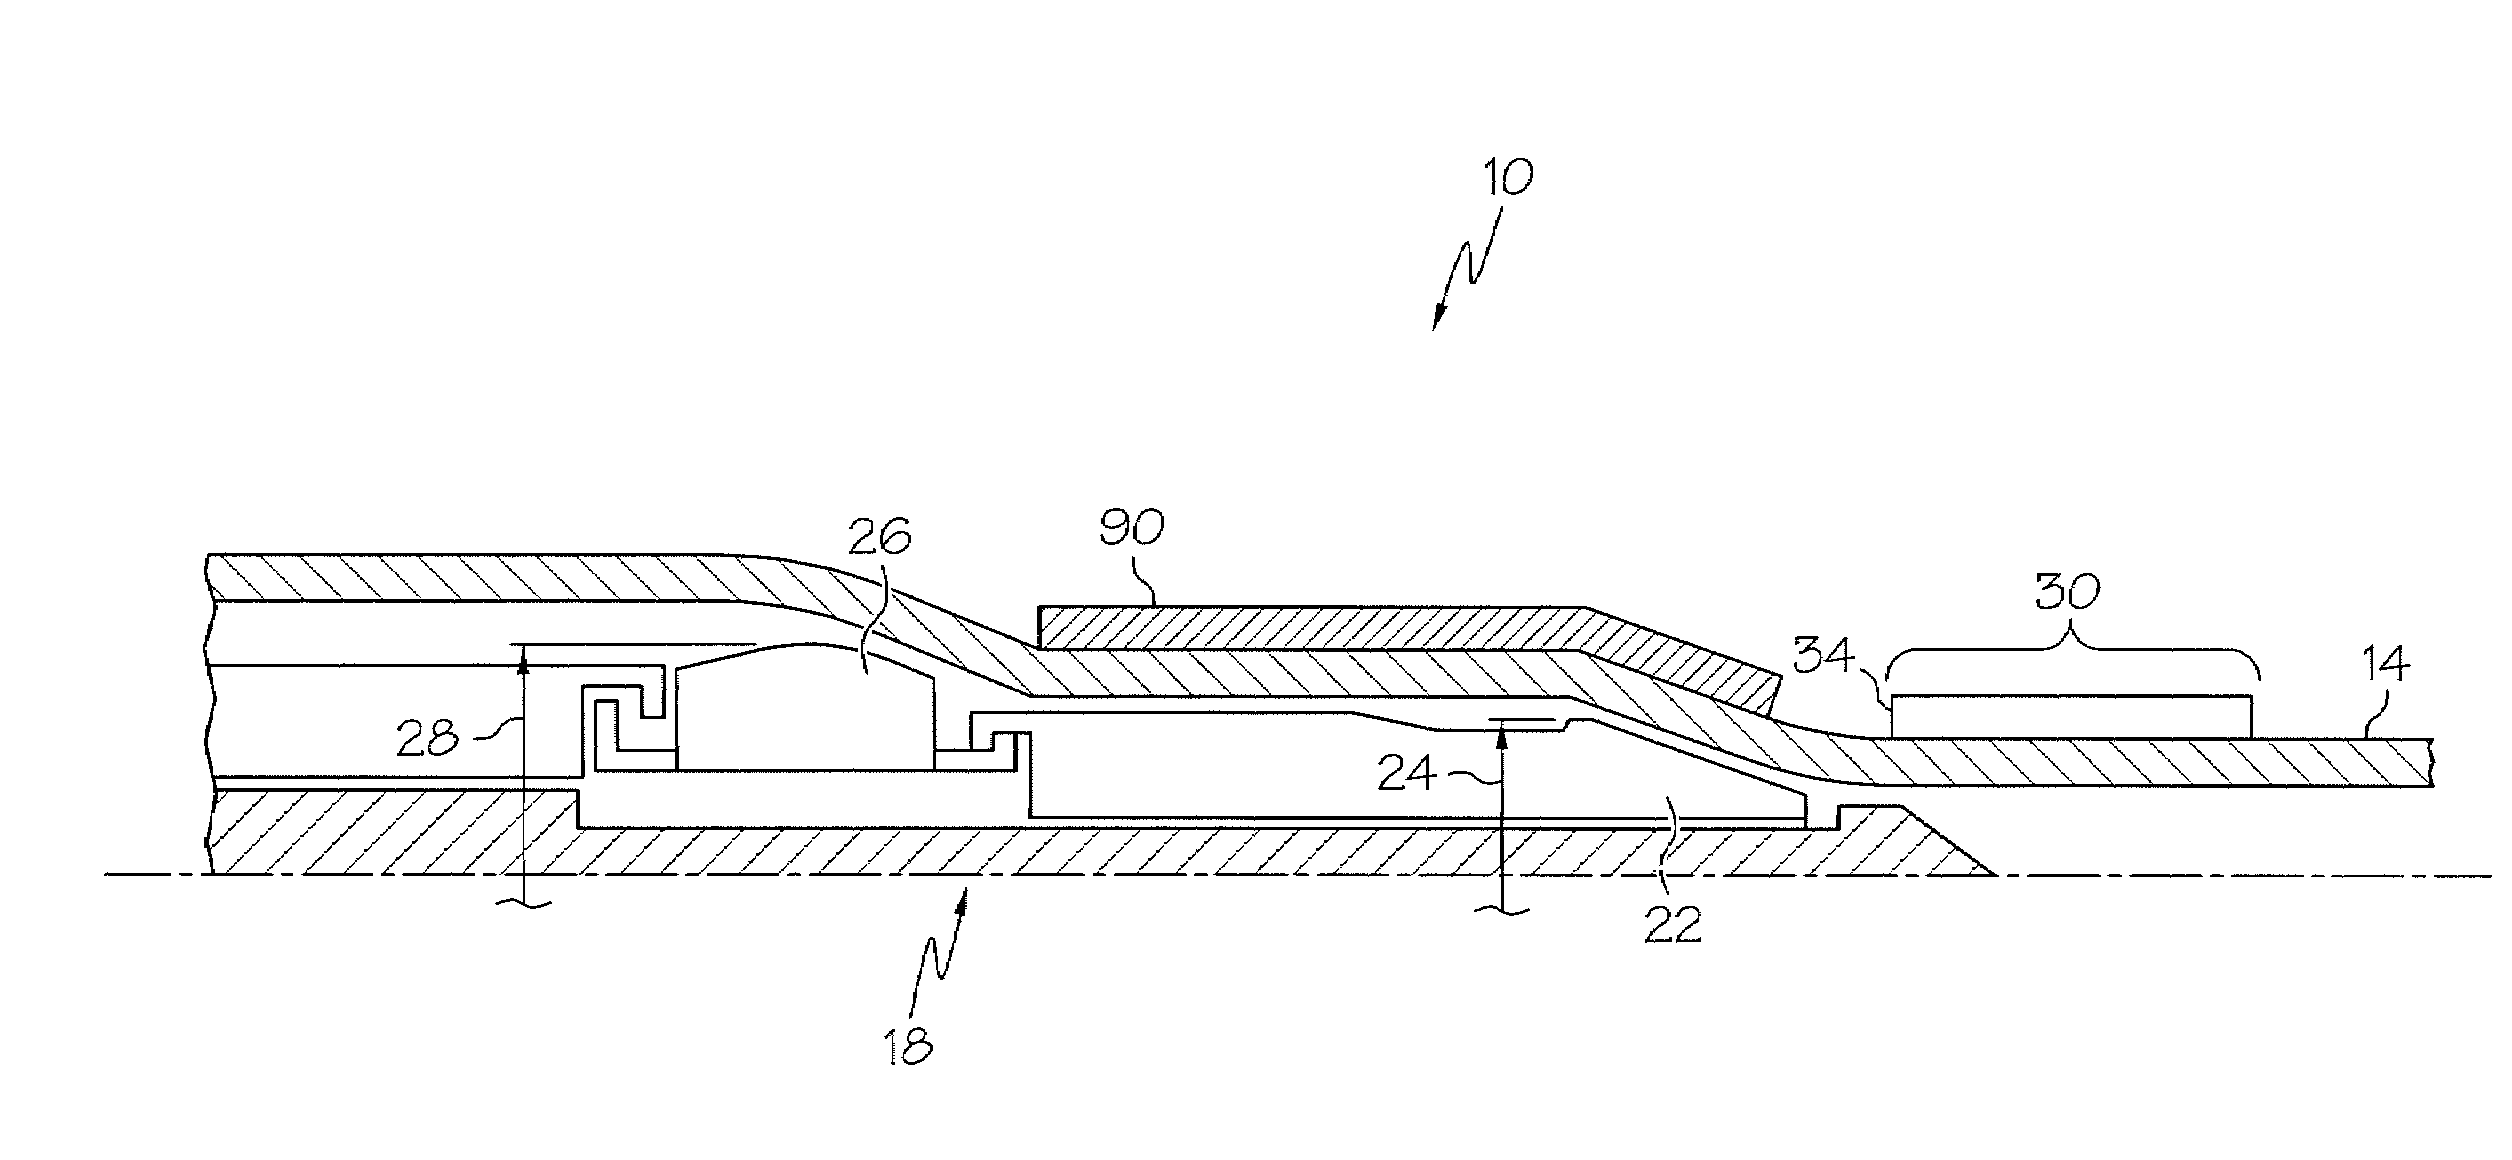 Downhole swaging system and method